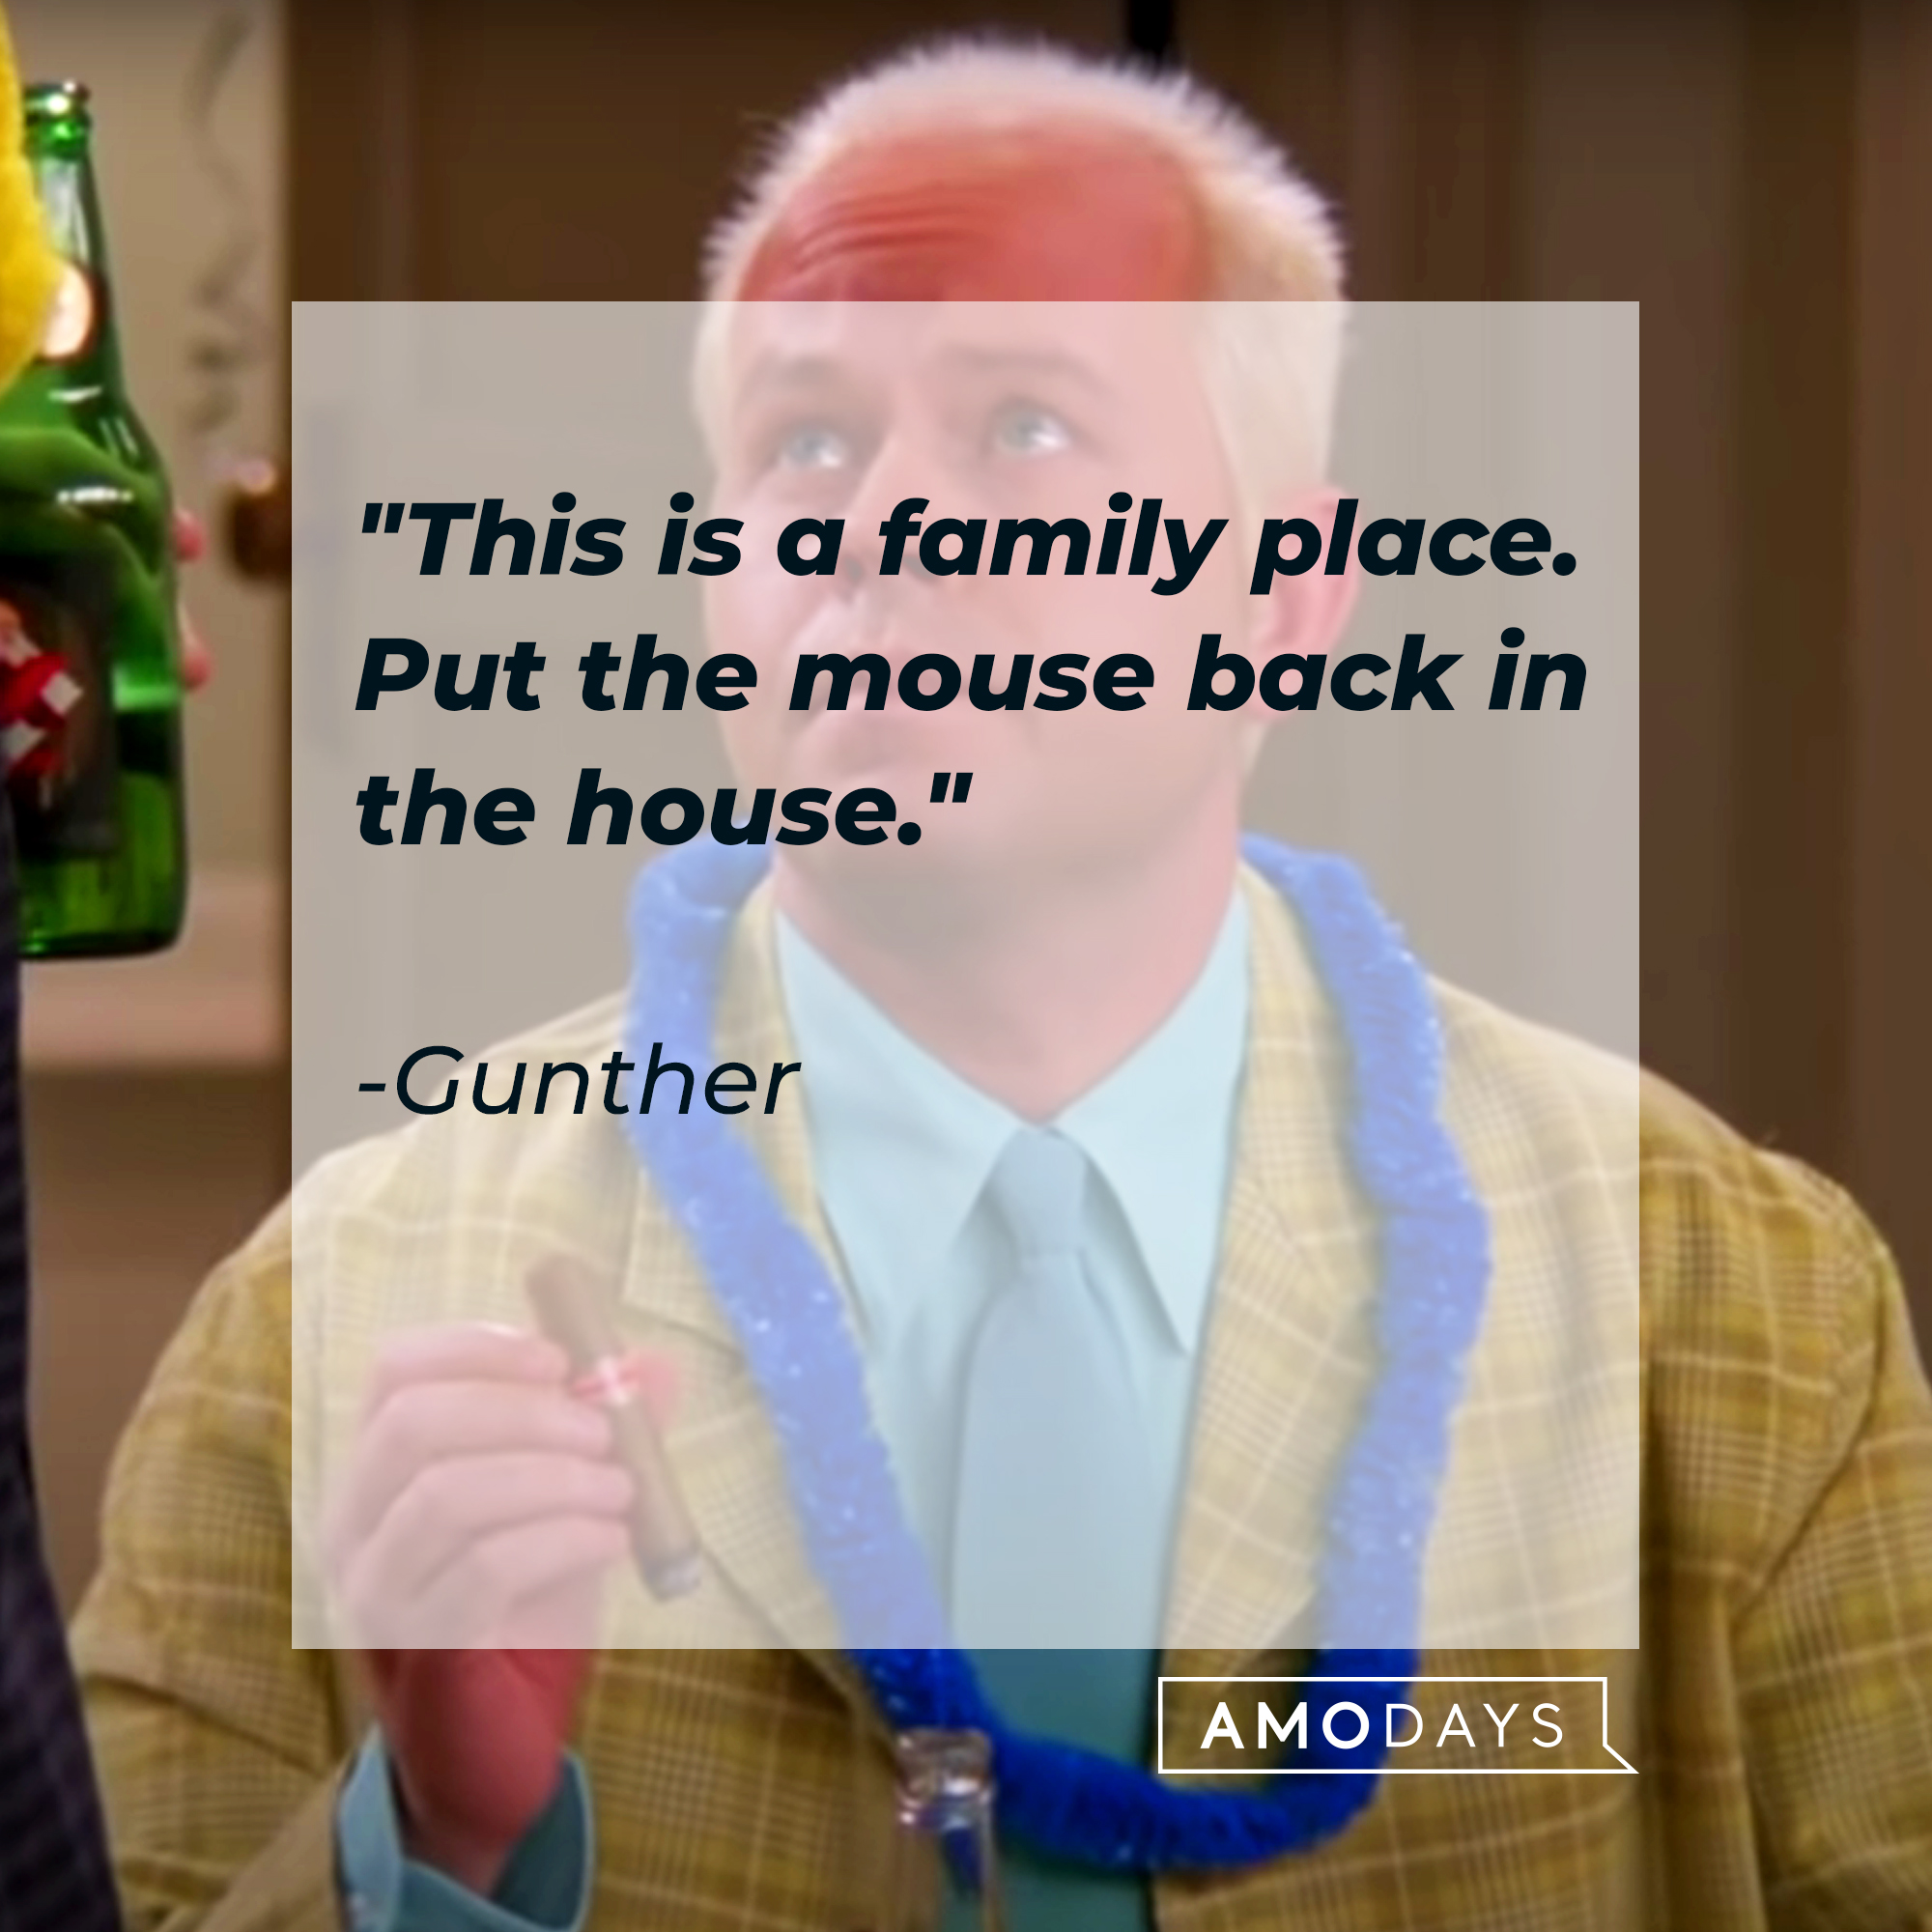 An image of Gunther, with his quote: "This is a family place. Put the mouse back in the house." | Source: Youtube.com/Friends